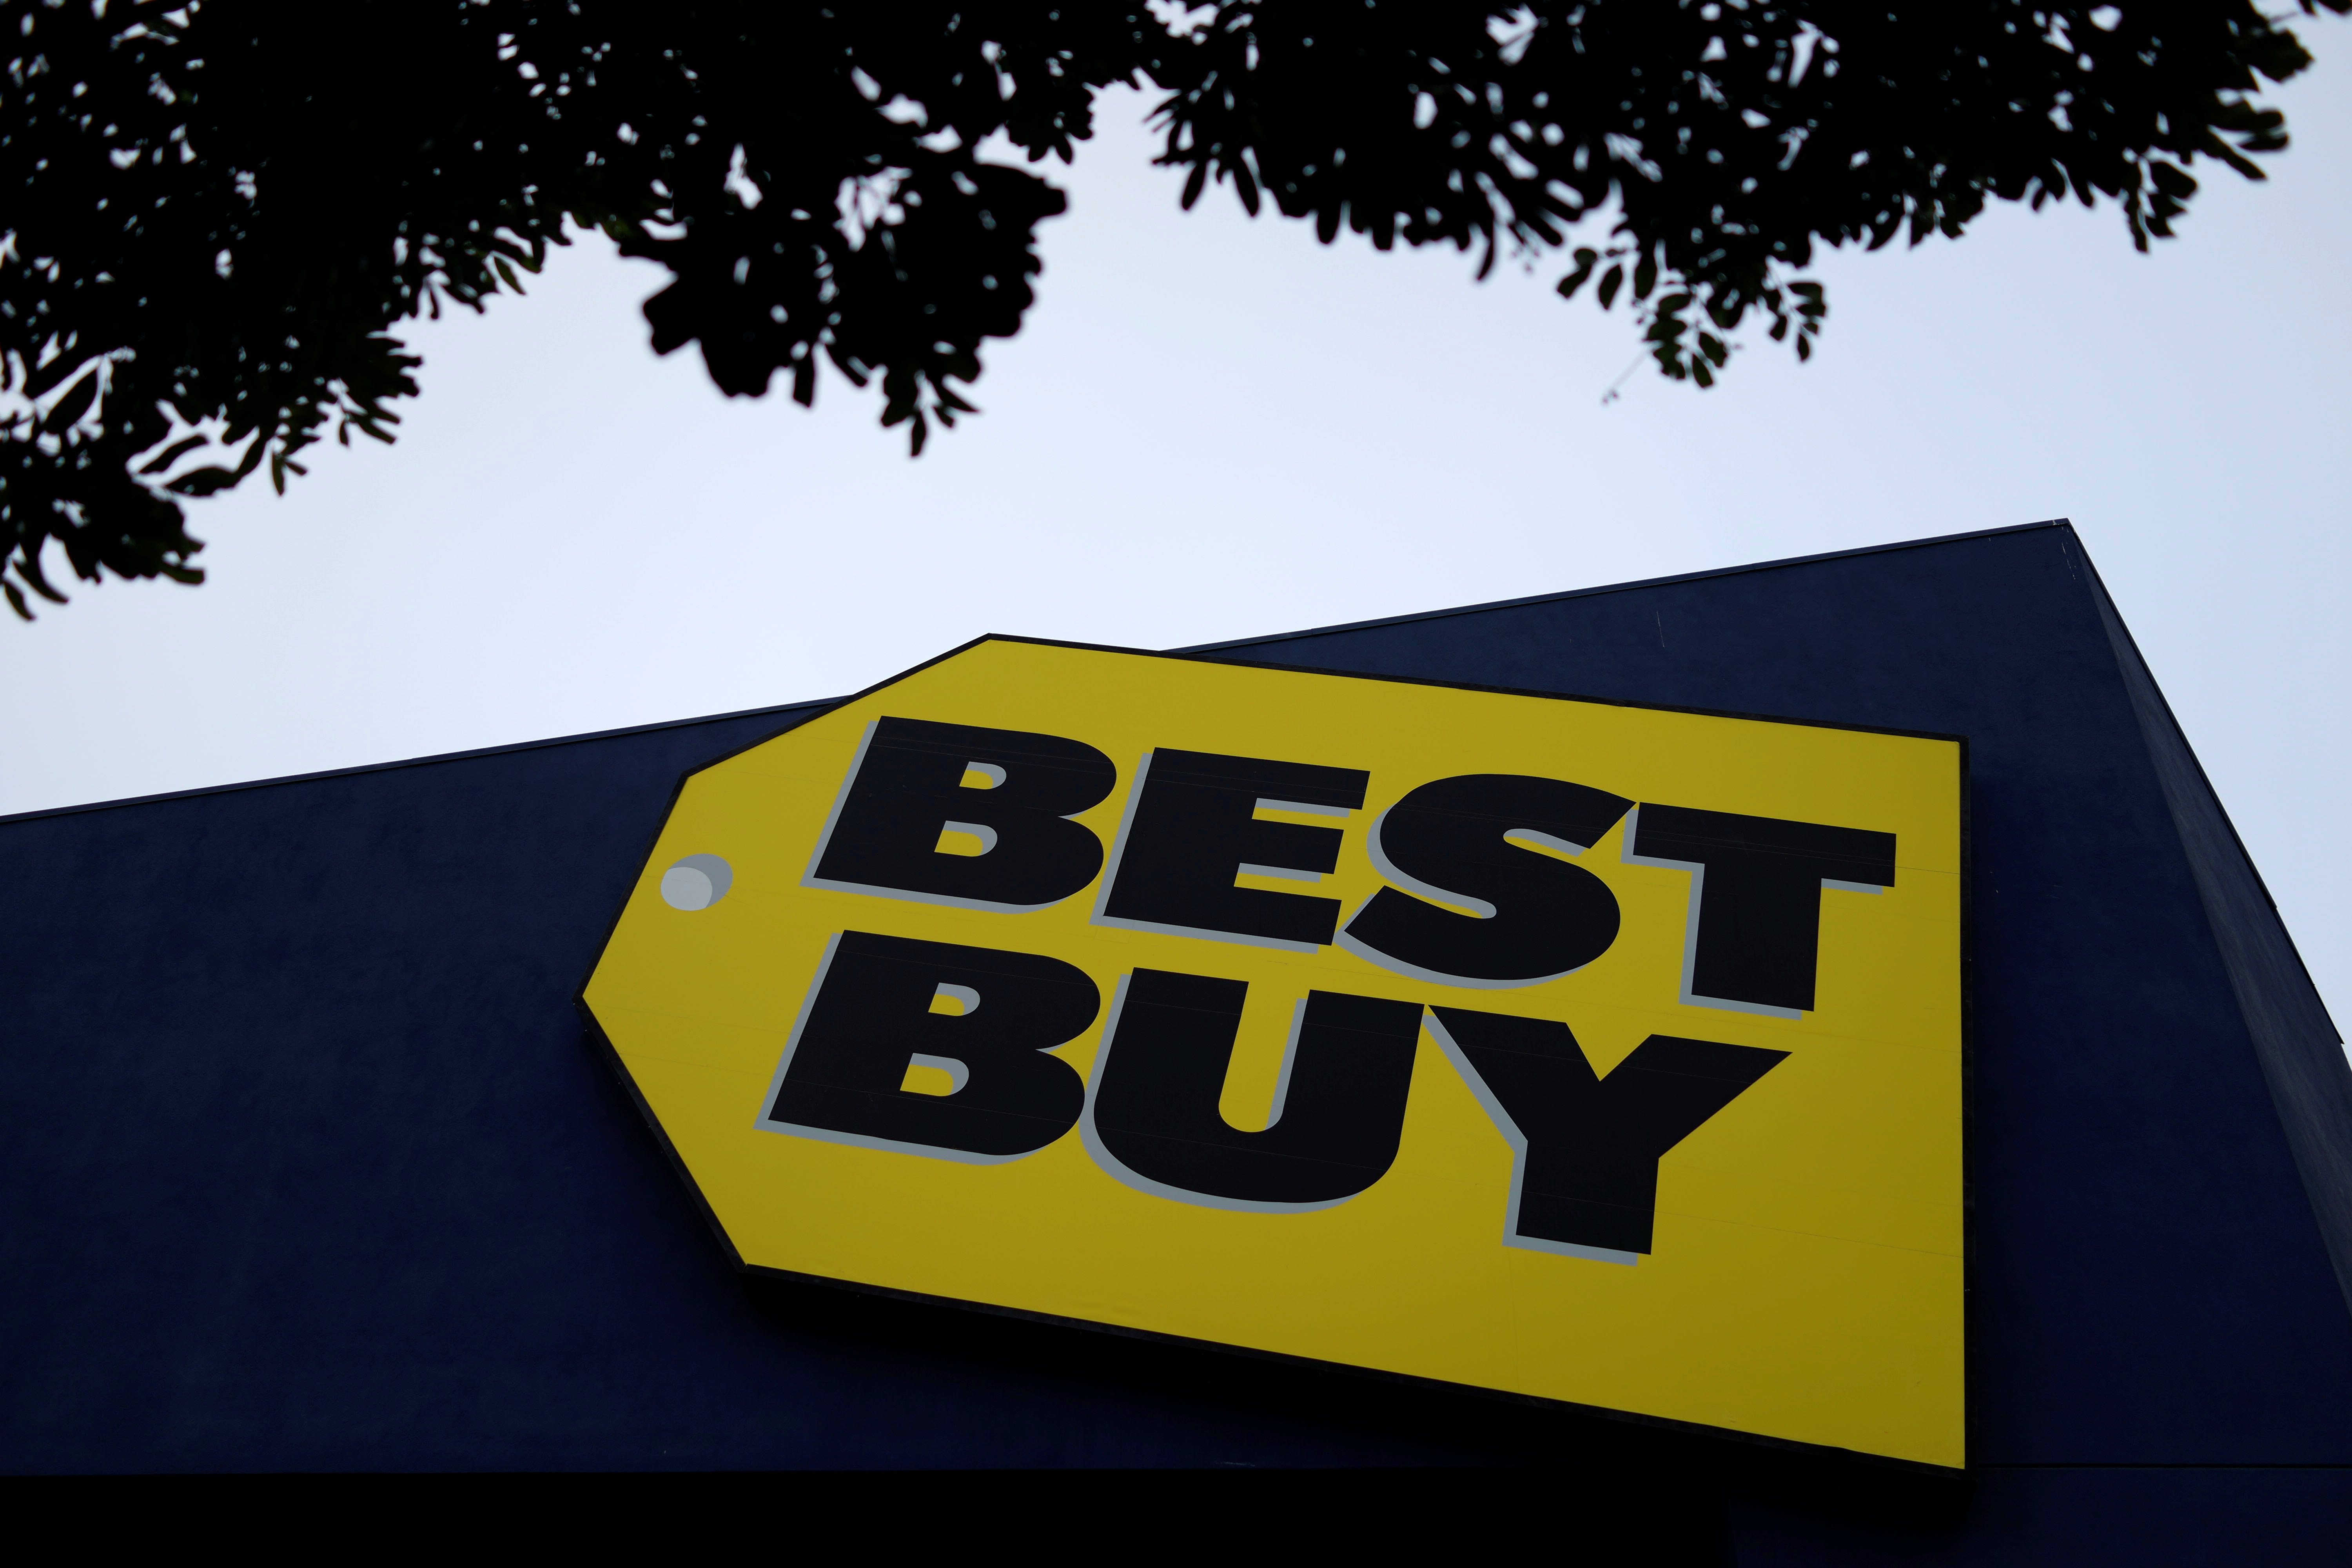 Best Buy shares fall after reporting second-quarter revenue and same-store sales misses